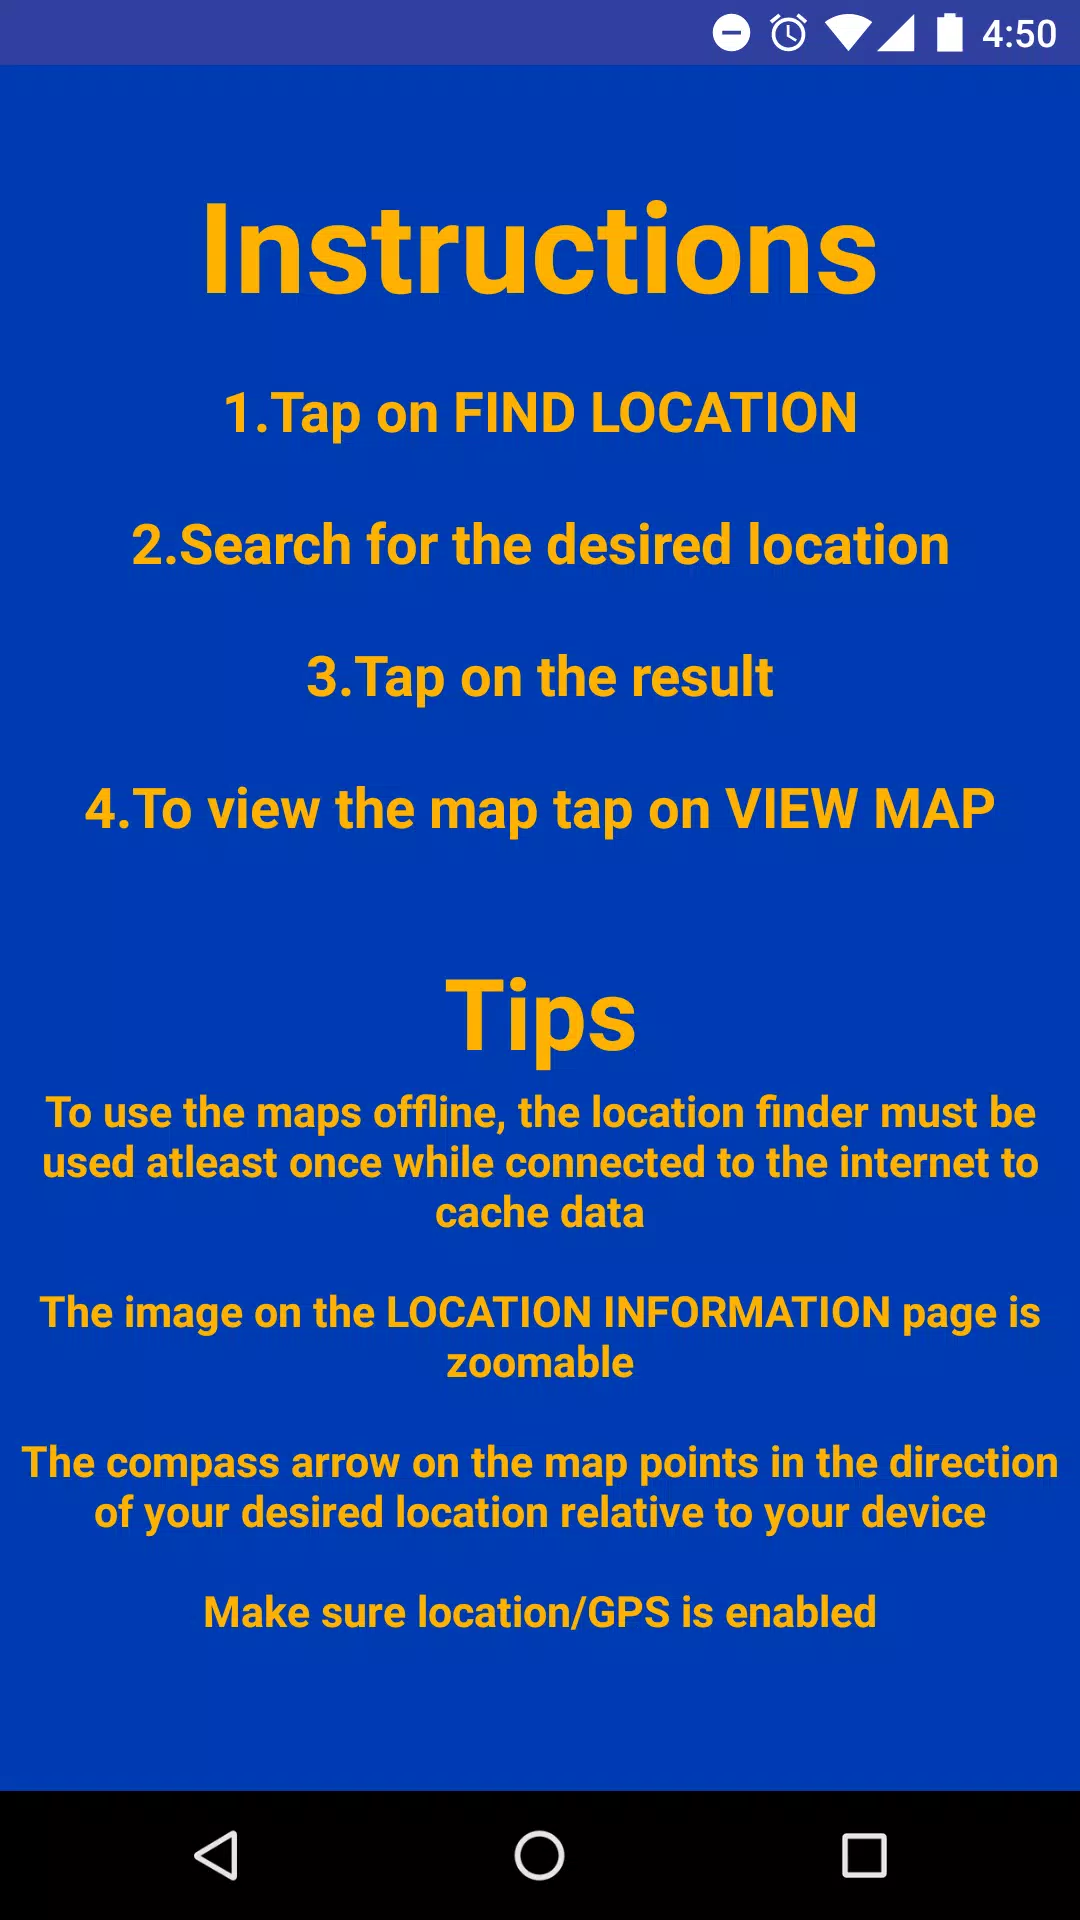 Sitefinder UWI - Location finder for UWI STA for Android - APK Download